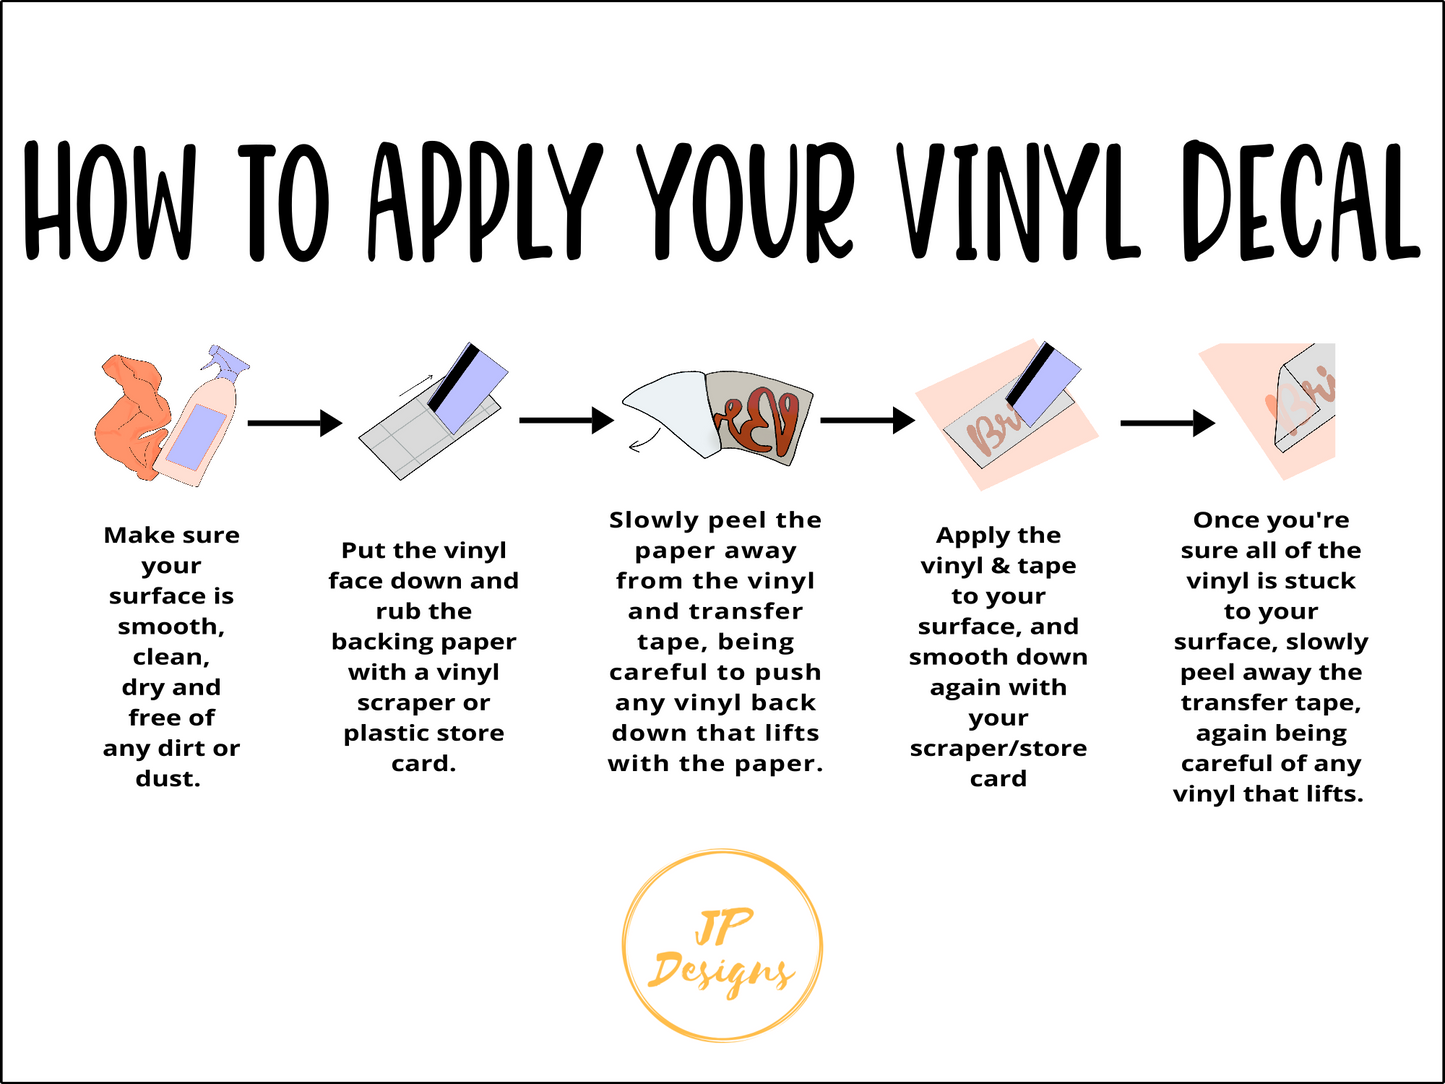 HOW TO APPLY A VINYL DECAL TO YOUR CAR